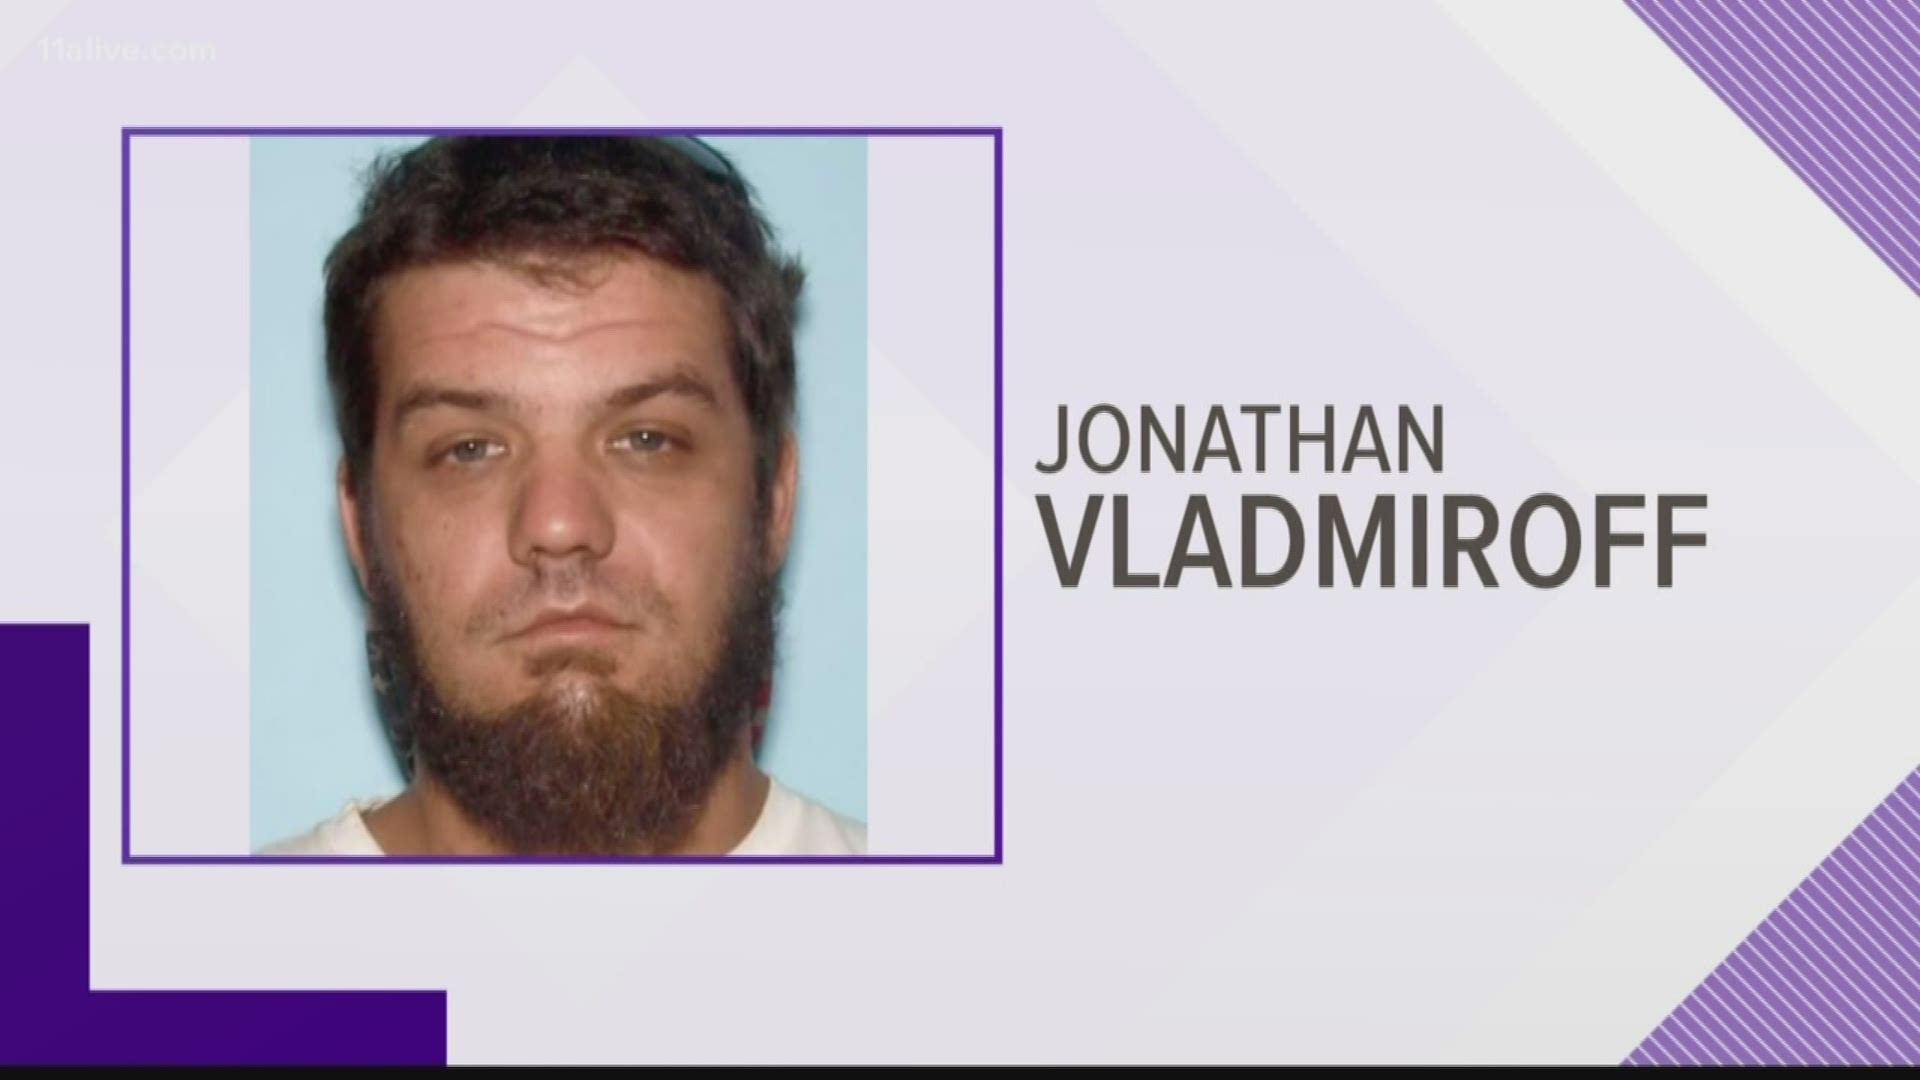 If you know the whereabouts of Jonathan Vladmiroff, please call police.